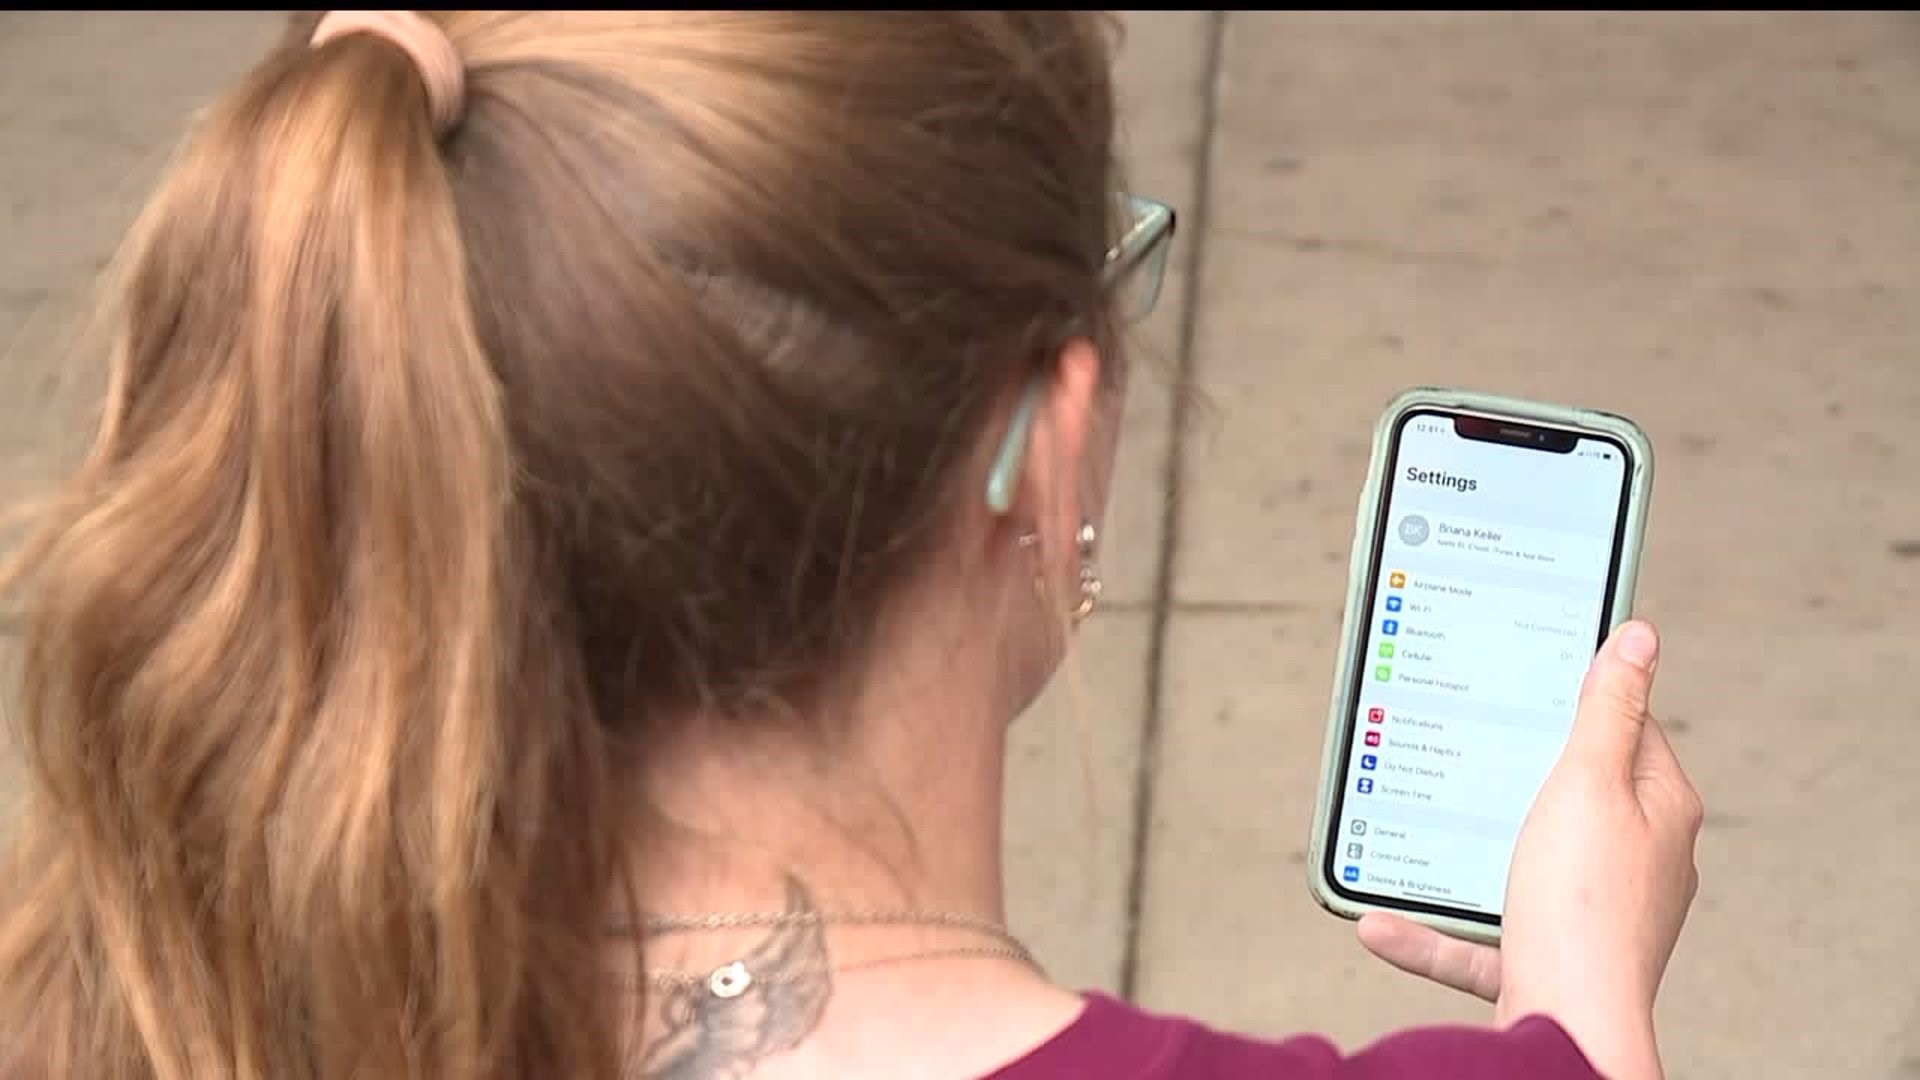 Lawmakers Push for Fewer Distracted Drivers